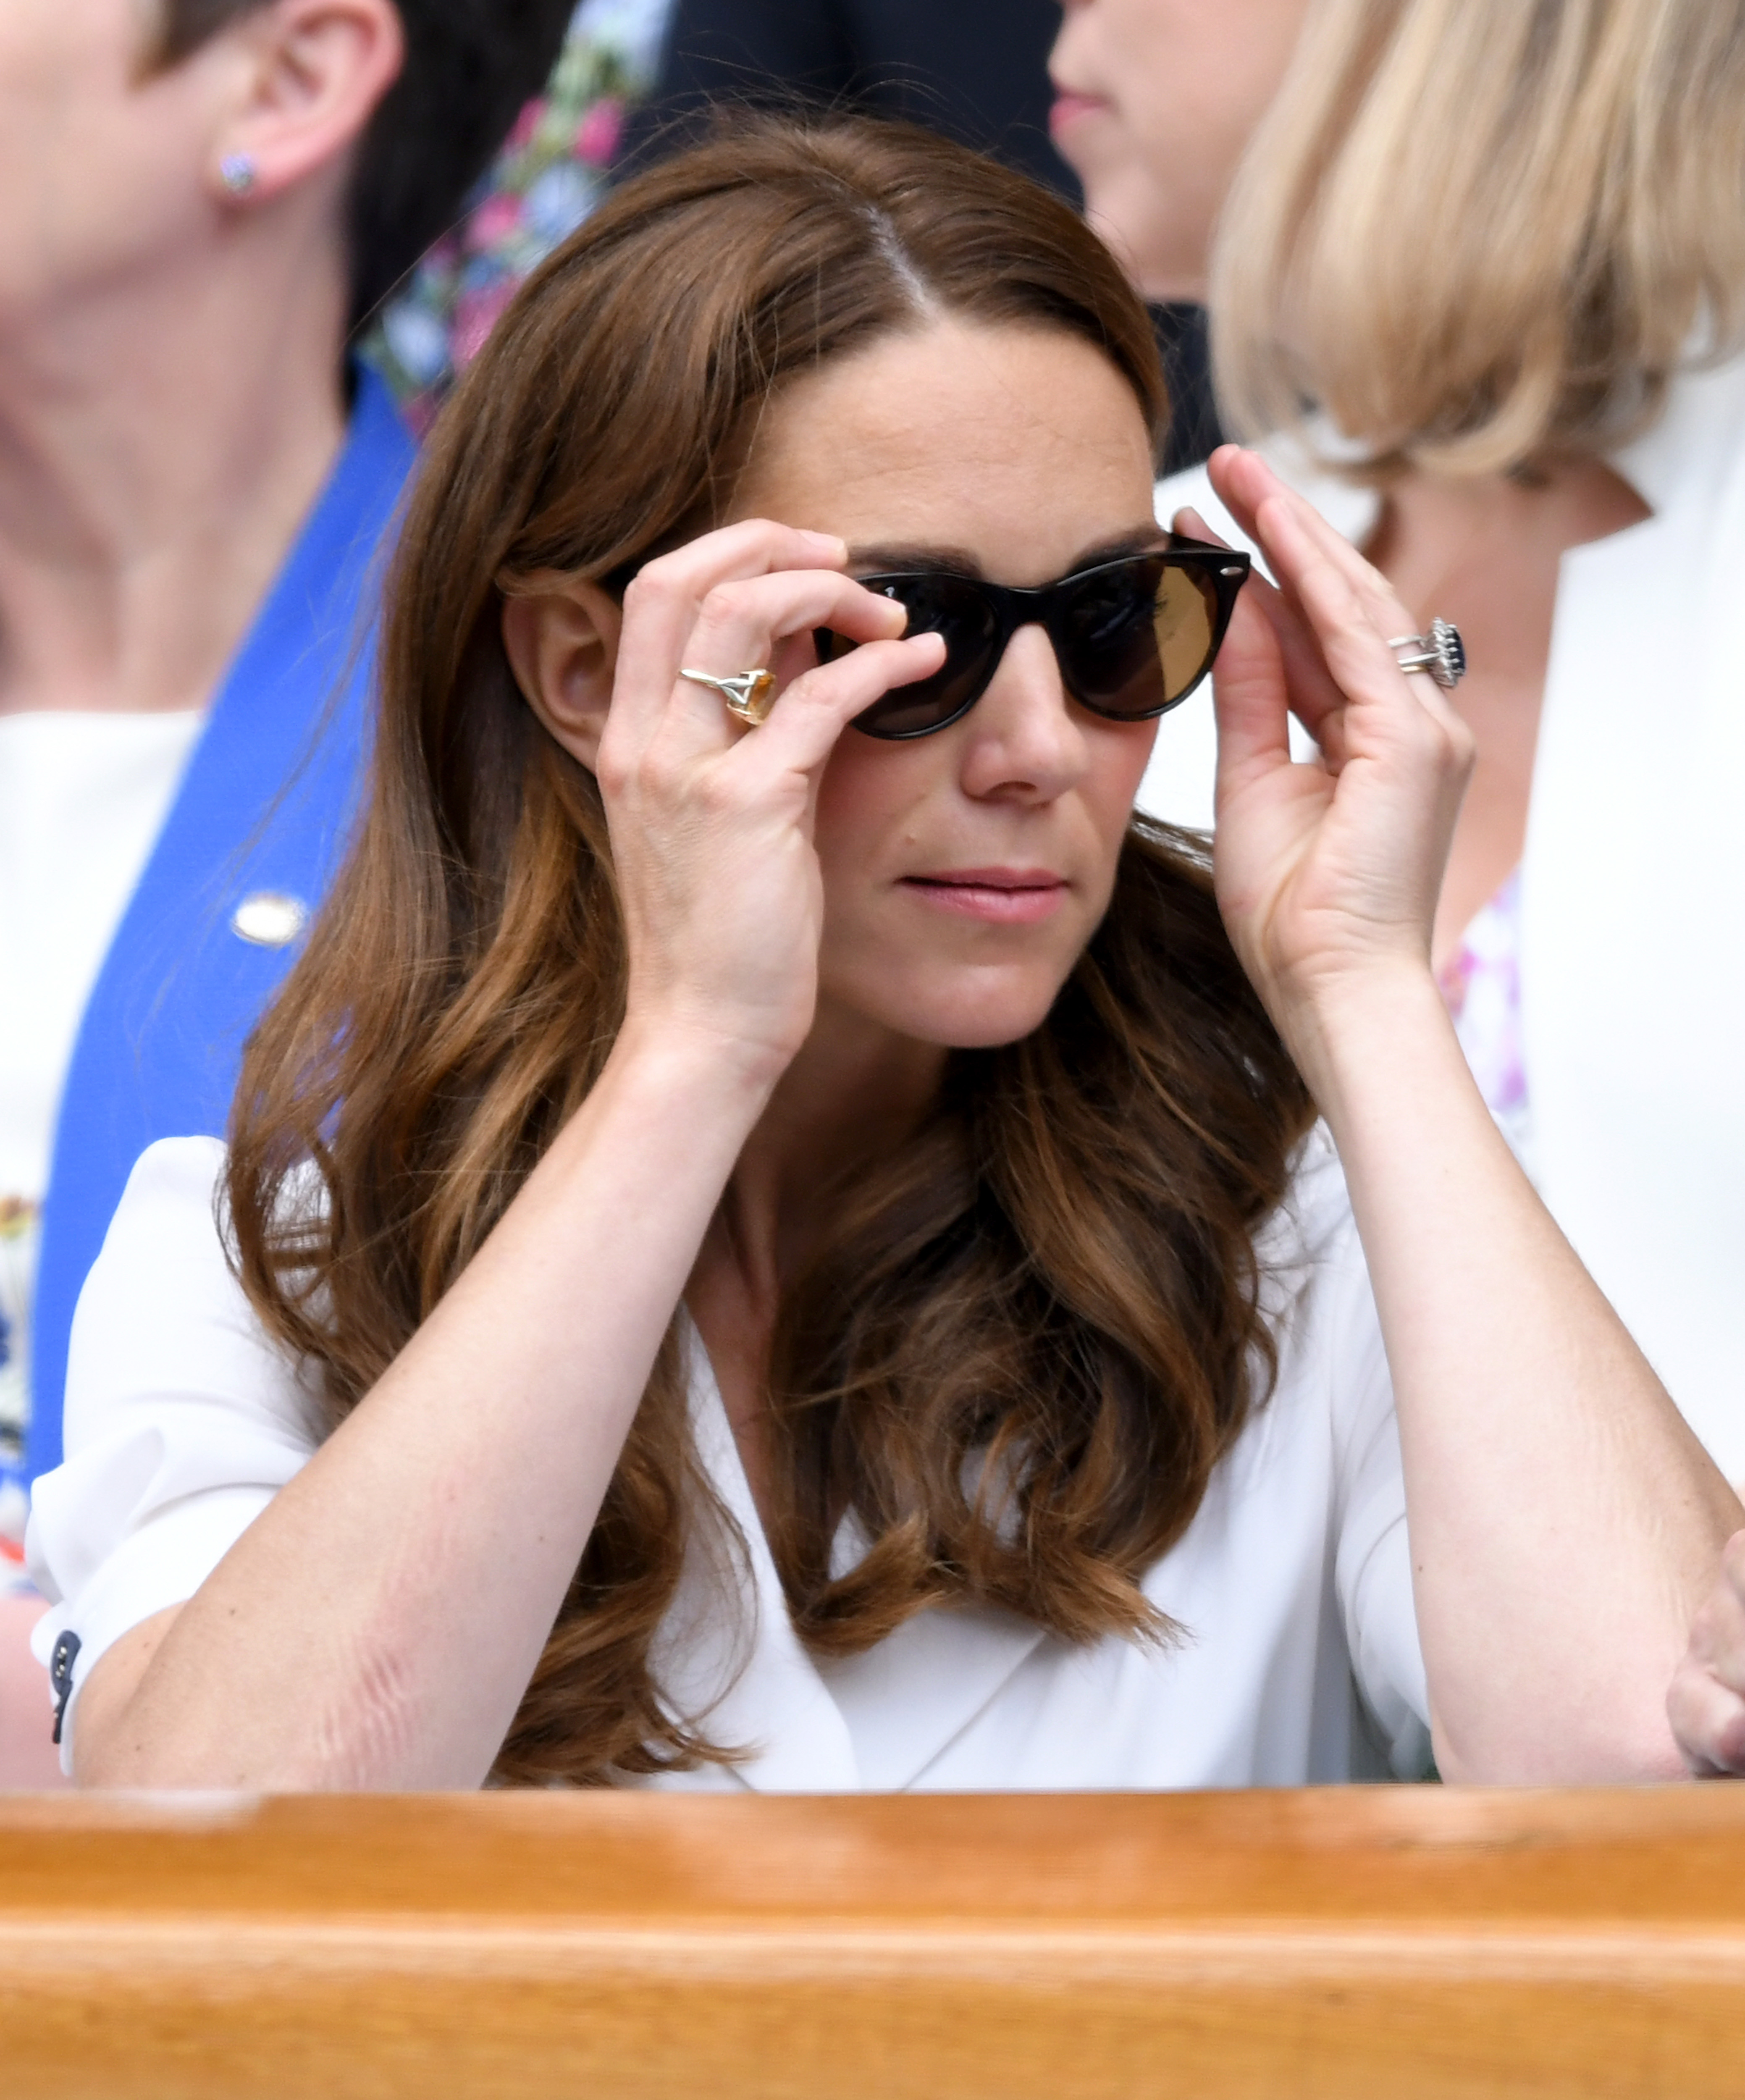 LONDON, ENGLAND - JULY 02: Catherine, Duchess of Cambridge adjusts her sunglasses as she attends day 2 of the Wimbledon Tennis Championships at the All England Lawn Tennis and Croquet Club on July 02, 2019 in London, England. (Photo by Karwai Tang/Getty Images) (Karwai Tang—Getty Images)